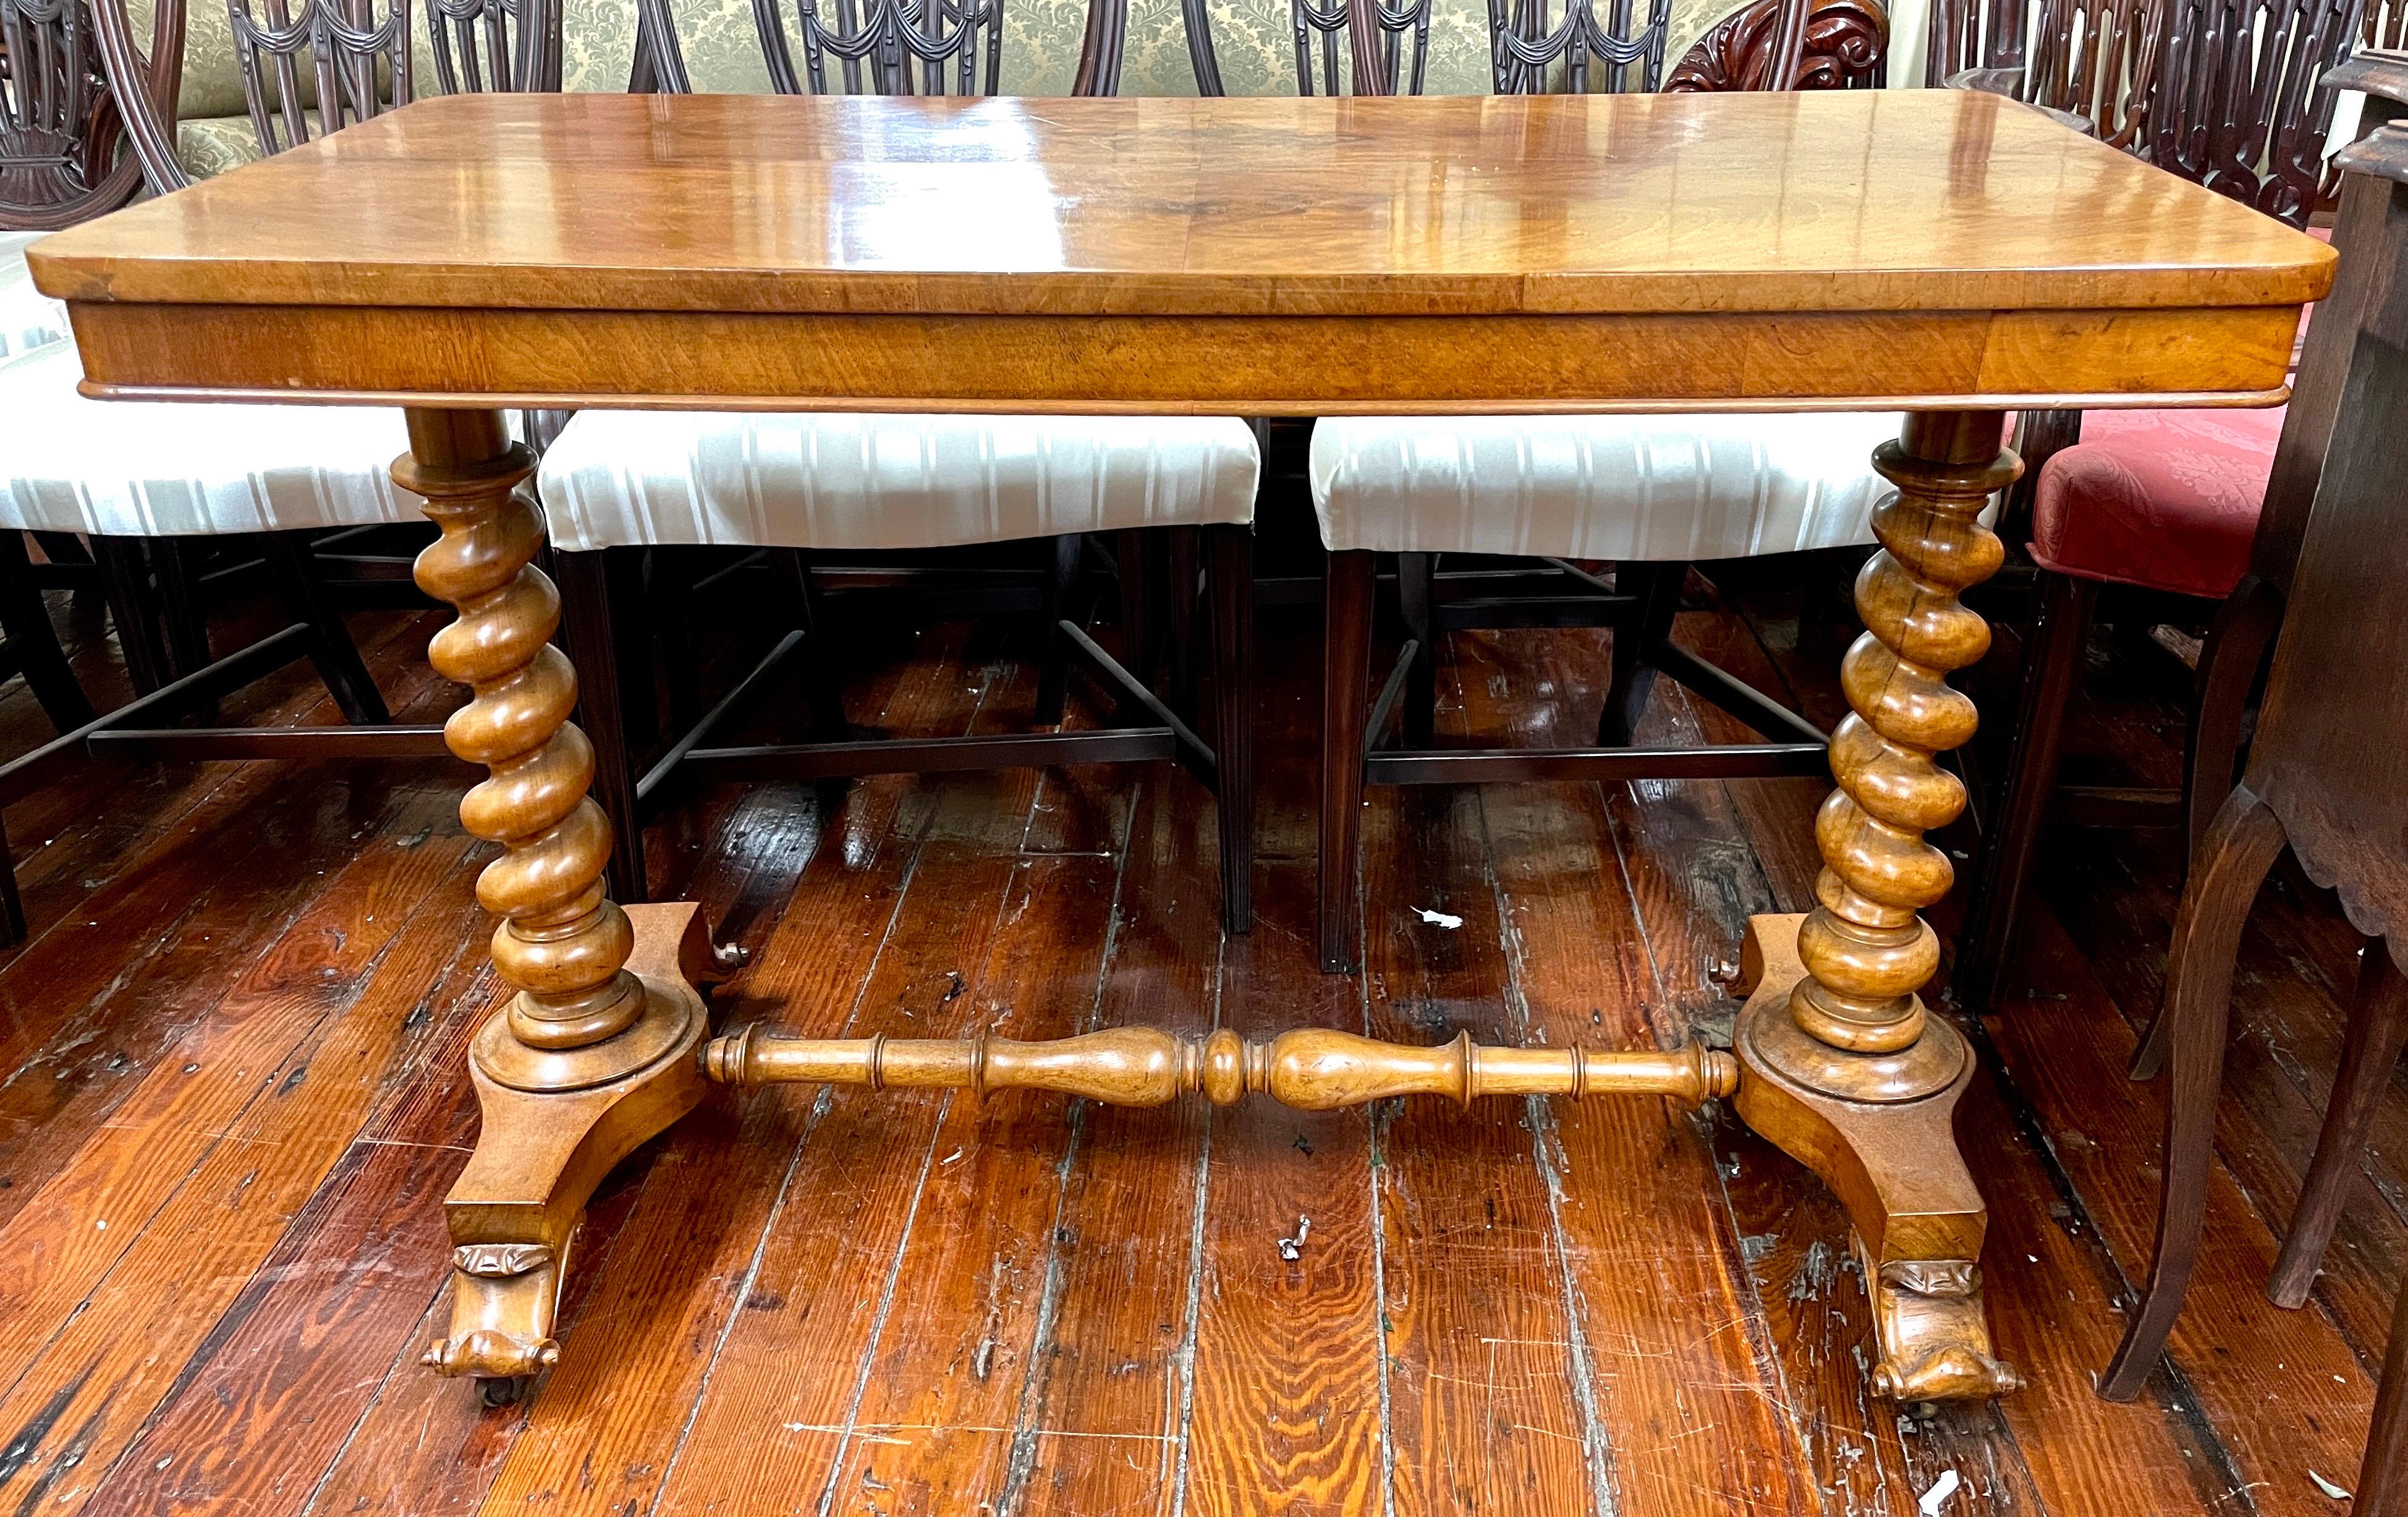 A Terrific mid 19th century Antique English burr walnut Library Table or Console Table (or Side Table!) with exceptional barley twist legs that support the top terminating in a lovely turned baluster shape stretcher and ending in a platform